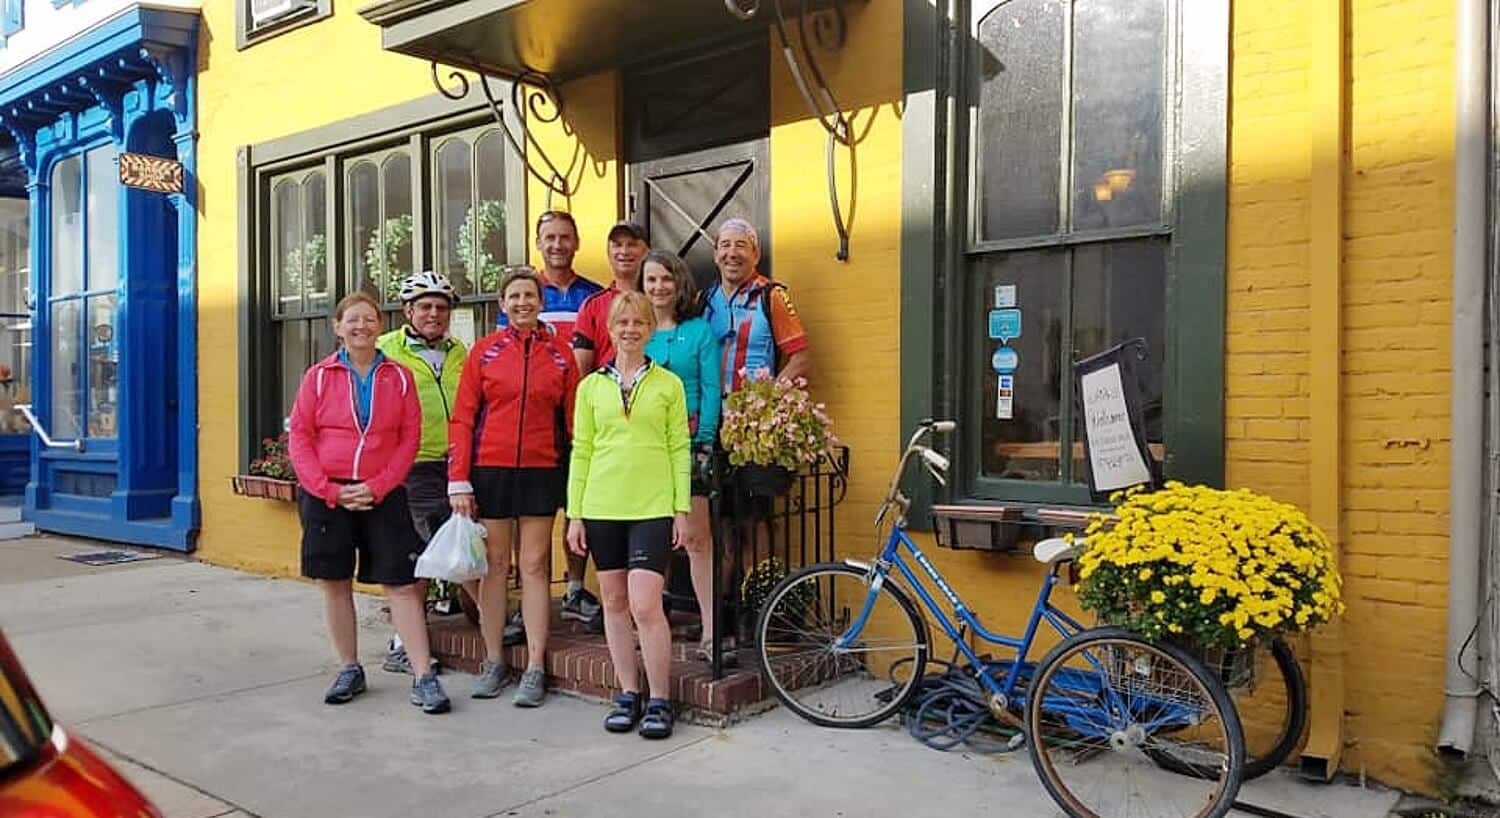 A group of people in cycling gear standing in front of a home with yellow brick